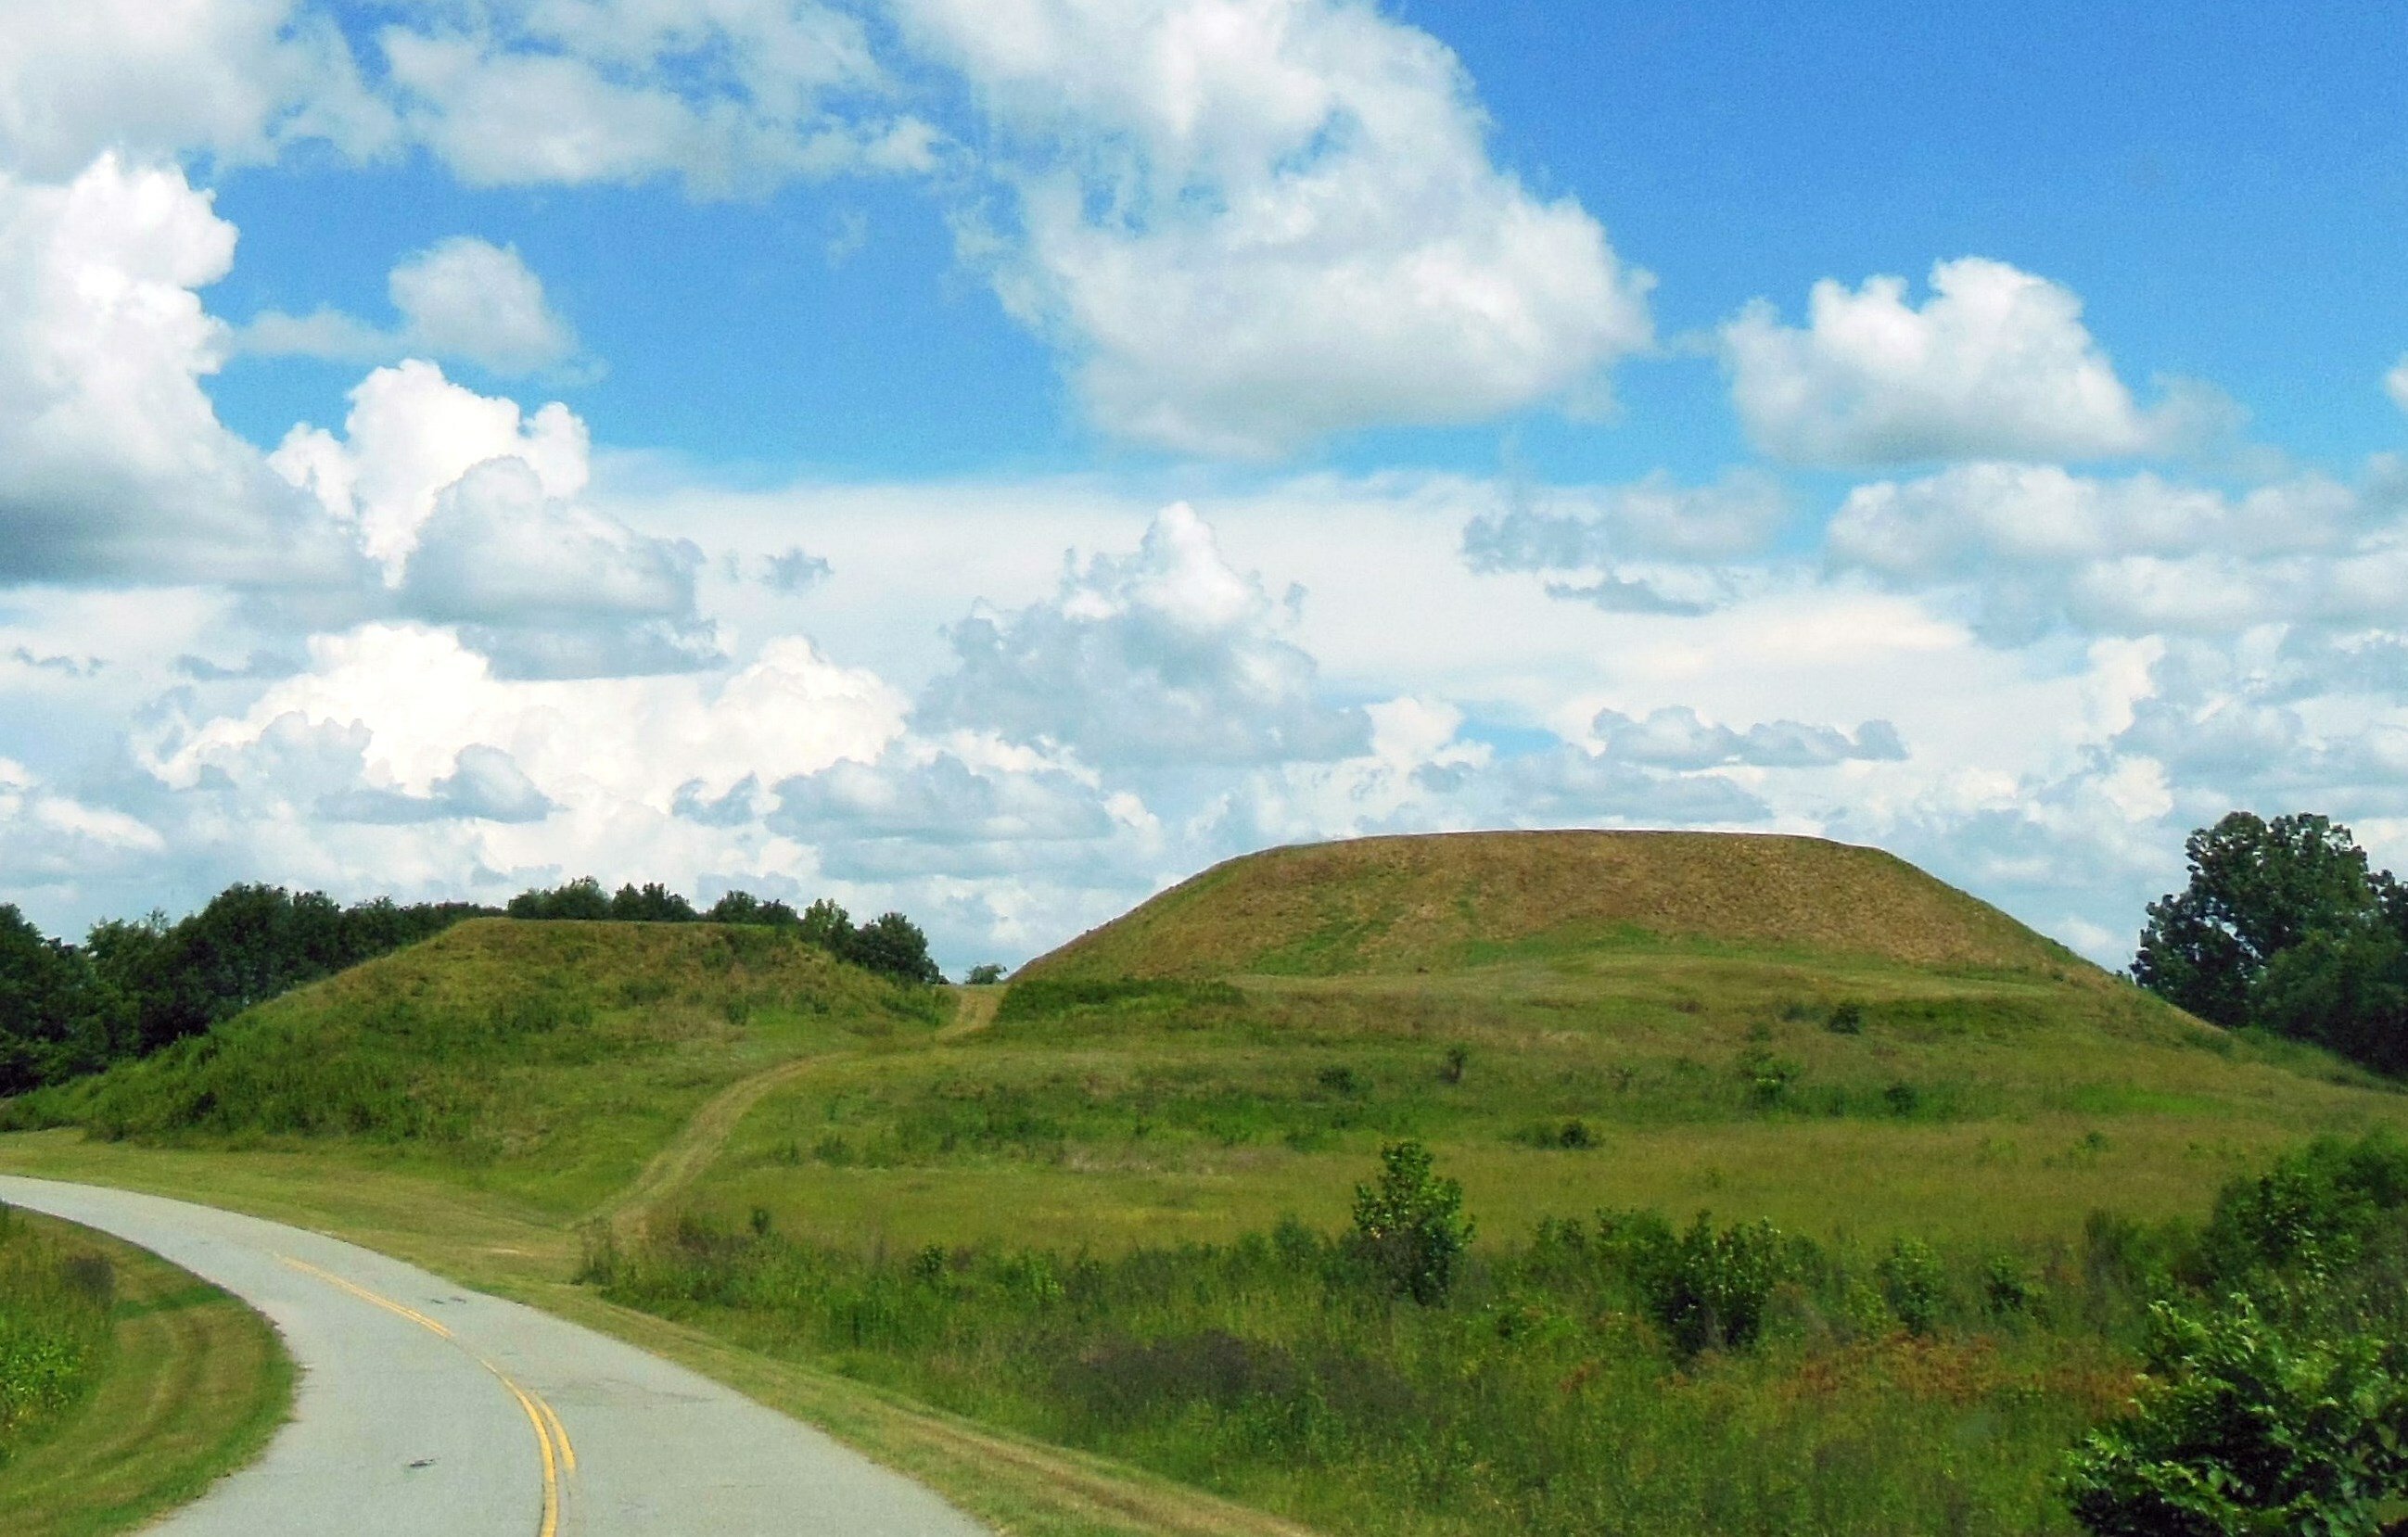 Great Temple and Lesser Temple Mounds at Ocmulgee Mounds National Historical Park